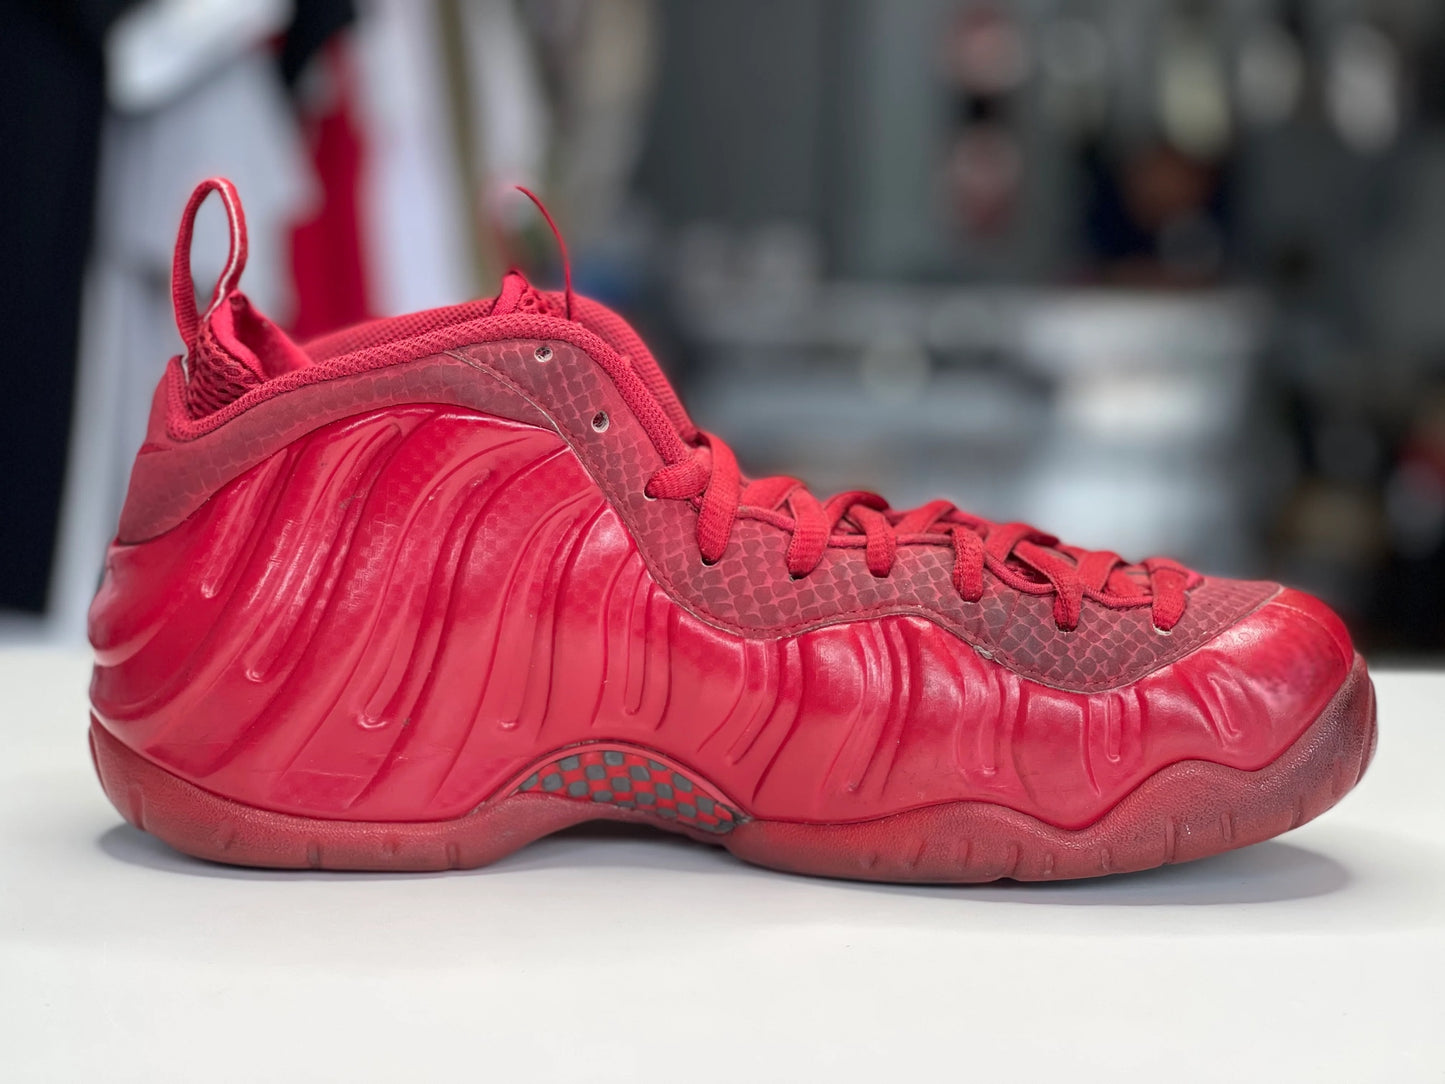 Foamposite Red October size 9.5